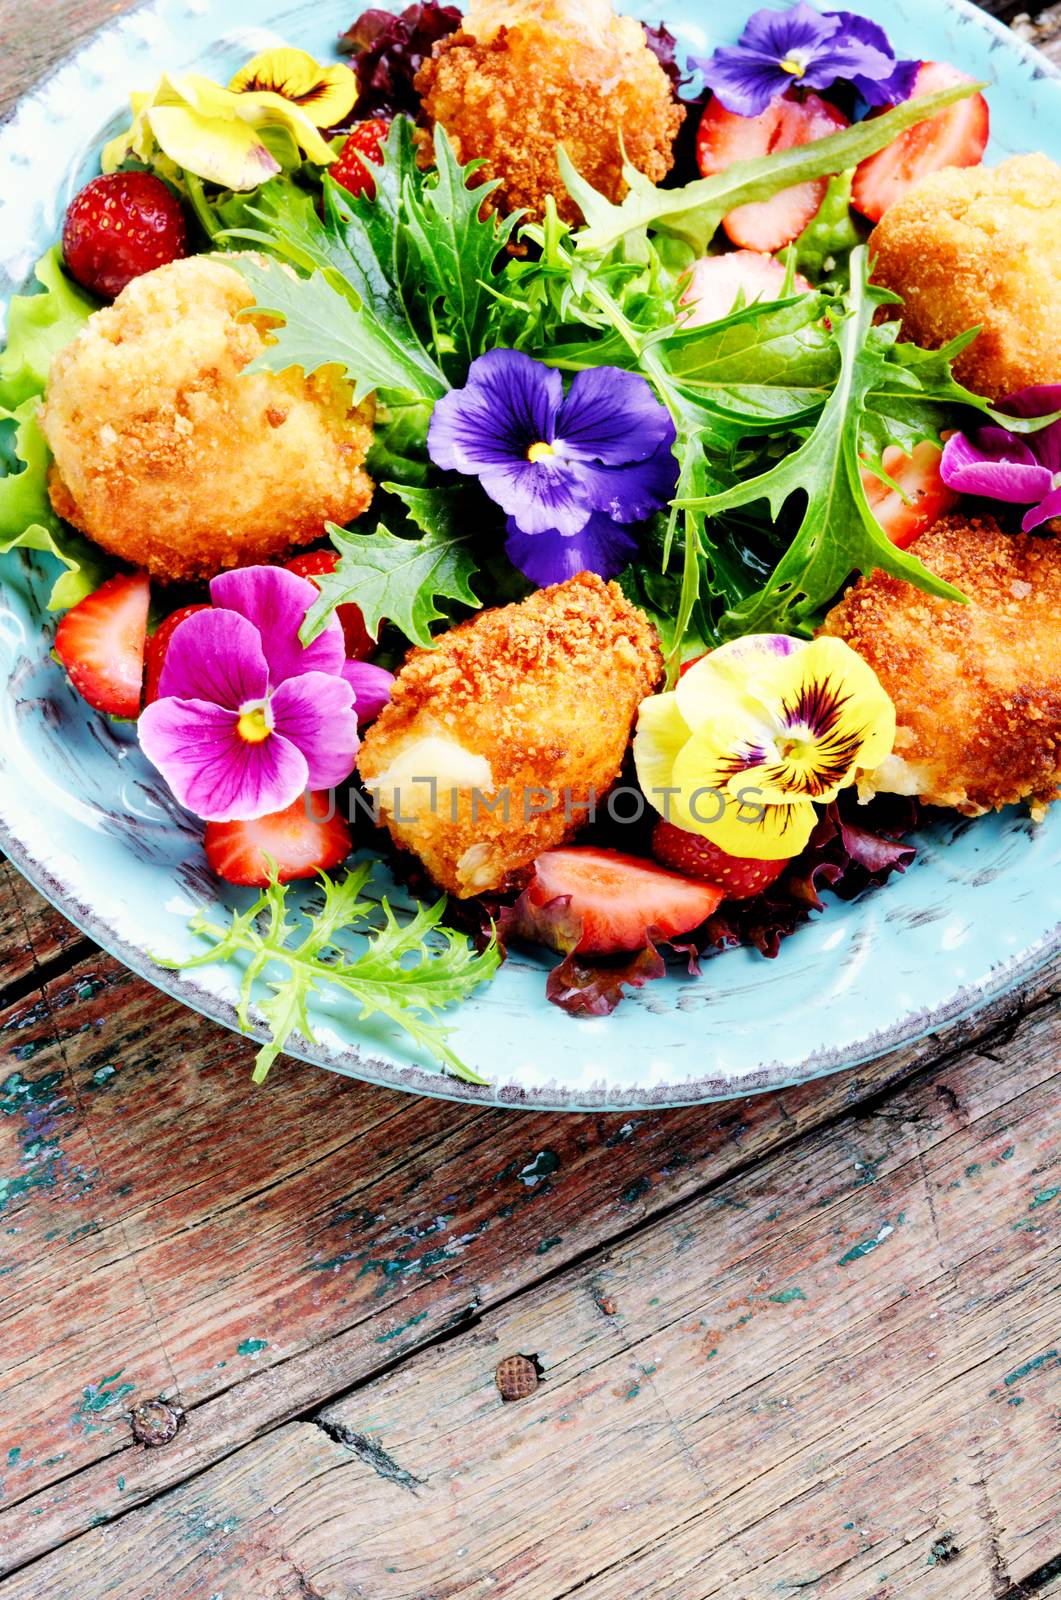 Vitamin summer salad with strawberries, grilled cheese, arugula and flowers.Healthy food